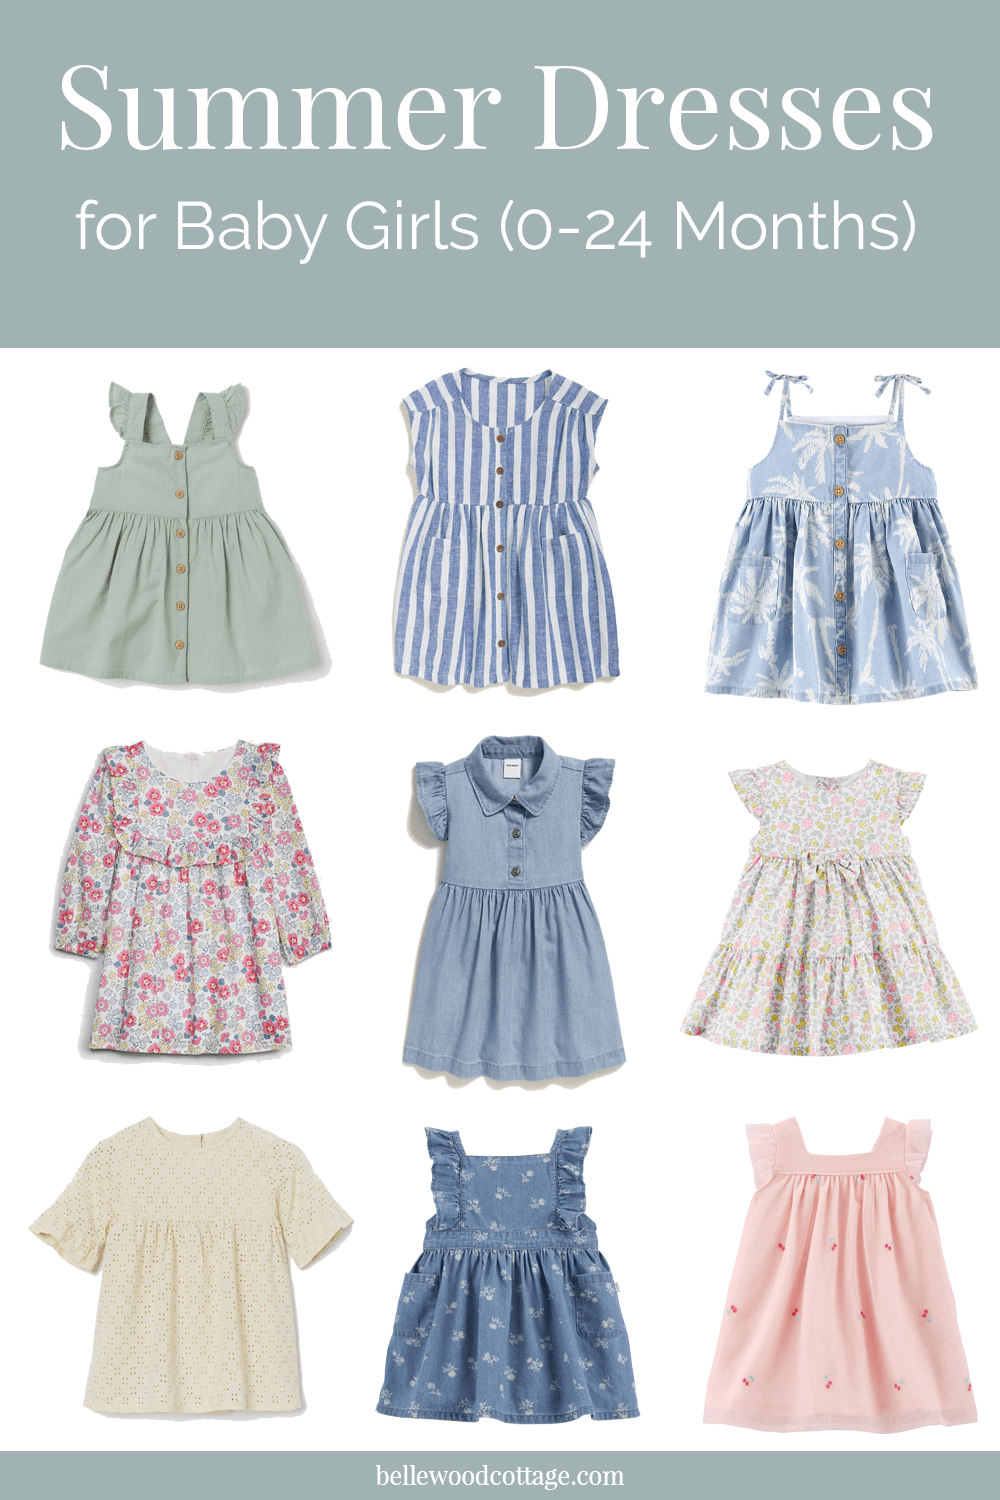 Collage image of summer dresses for baby girls.